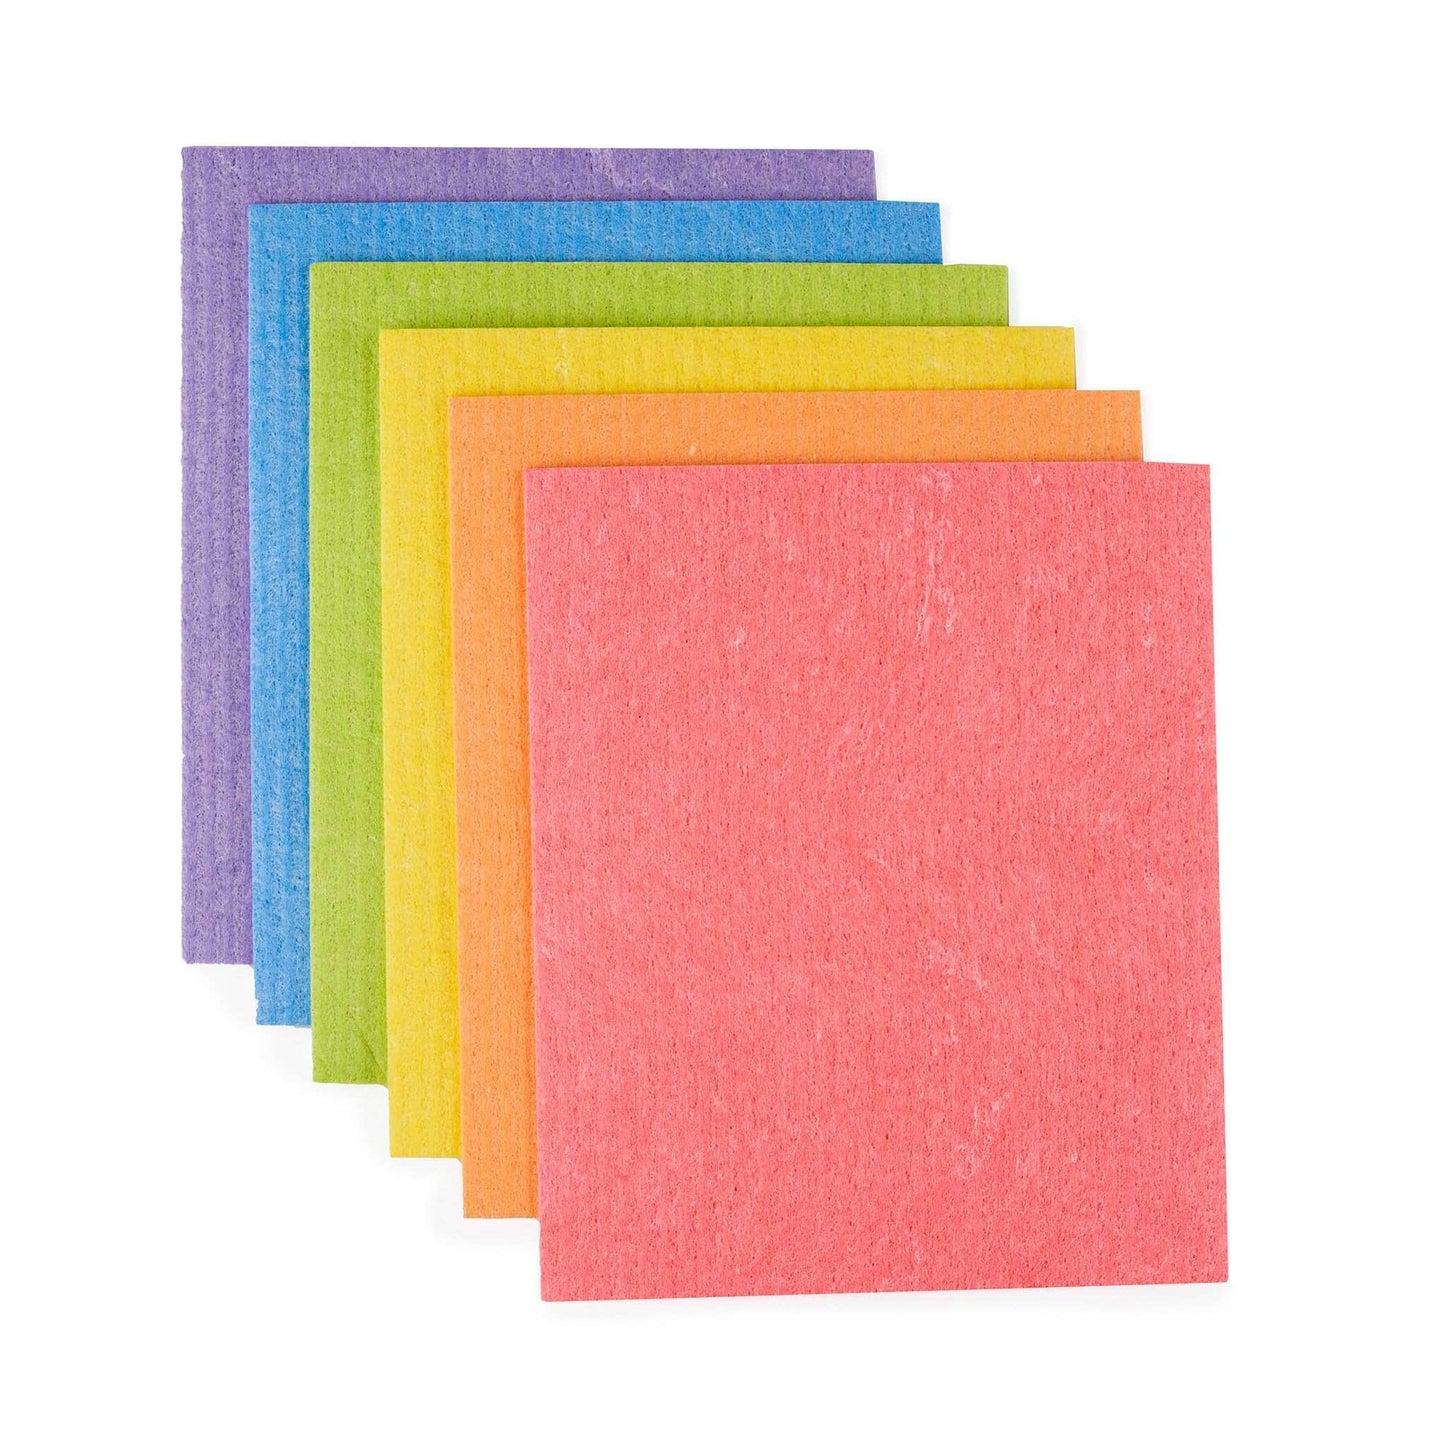 ecoLiving Cloths Compostable Sponge Cleaning Cloths 6 Pack - Rainbow